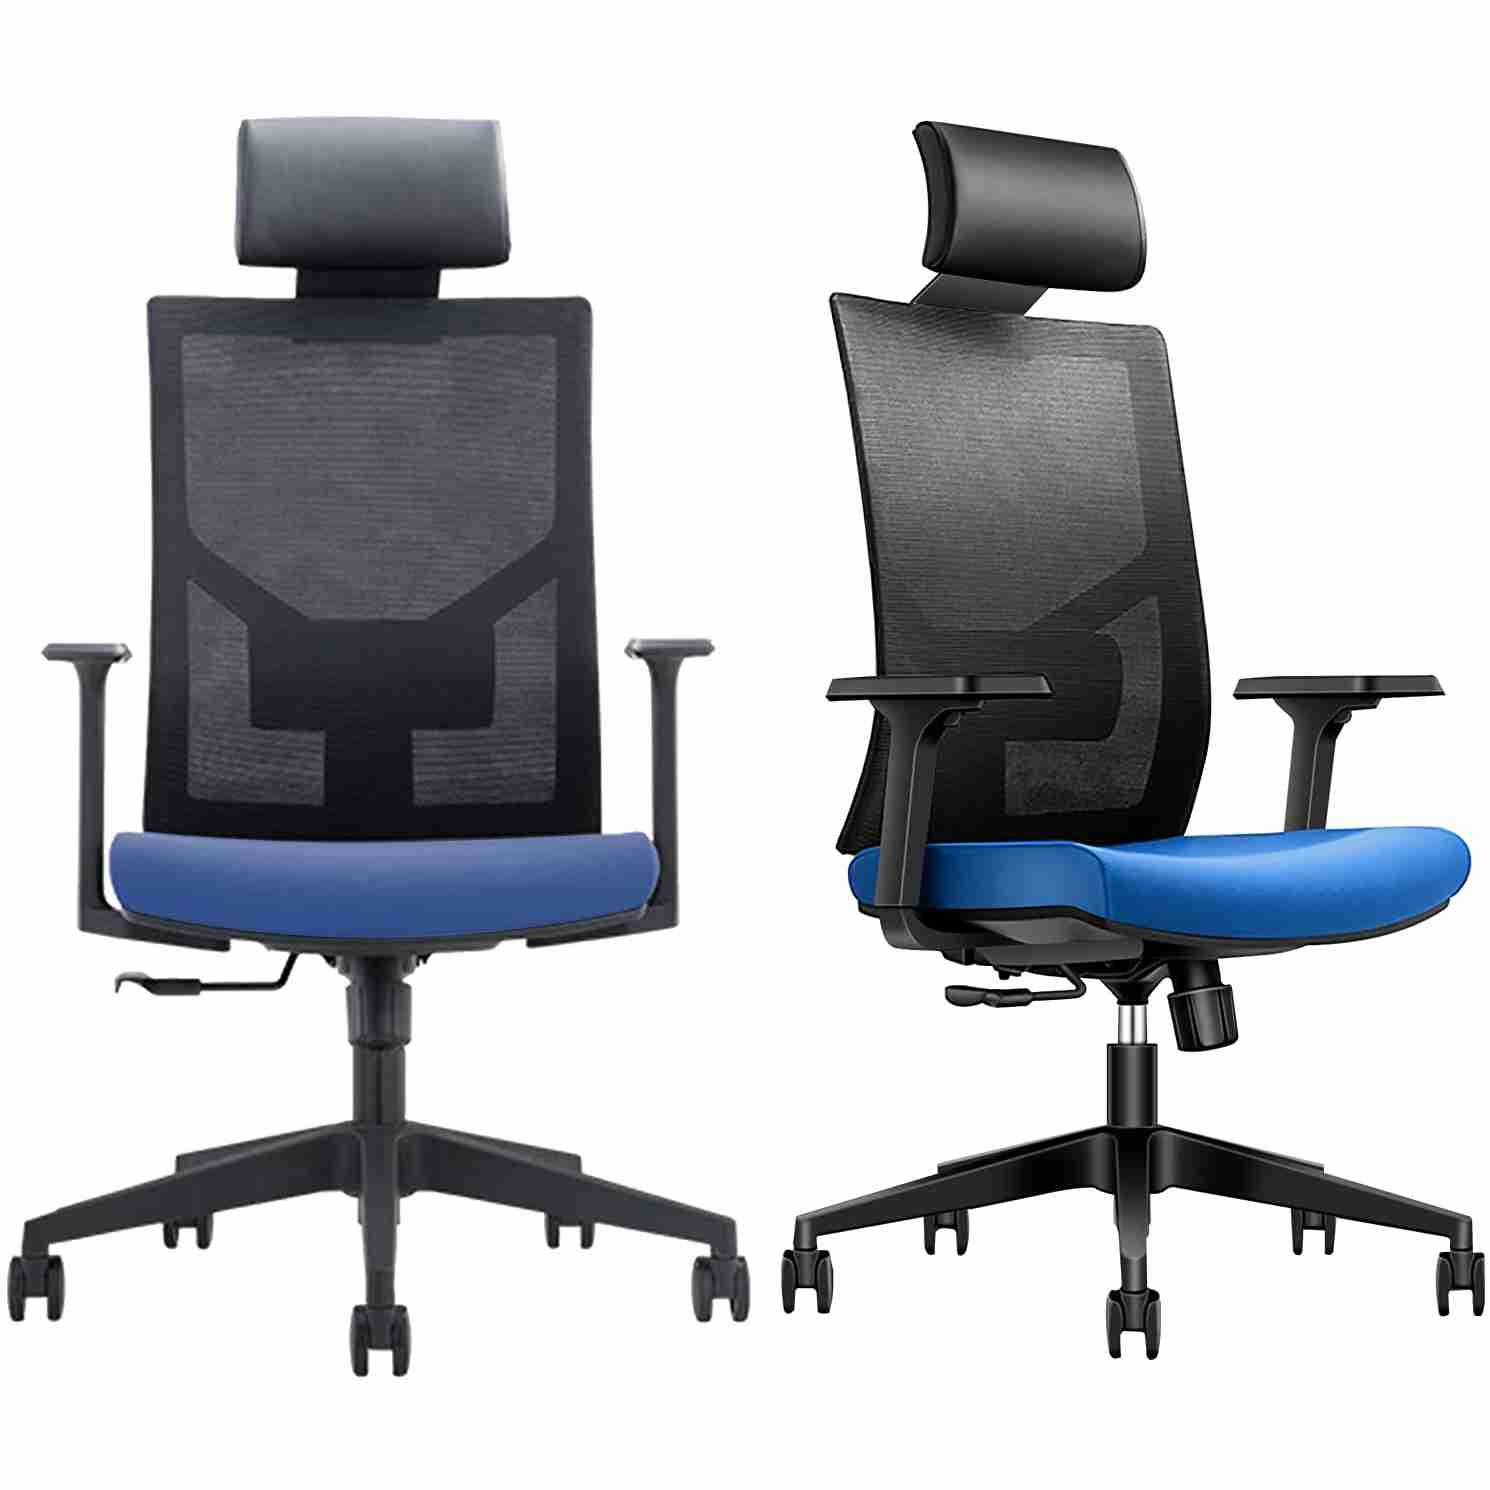 office-chair with cash back rebate